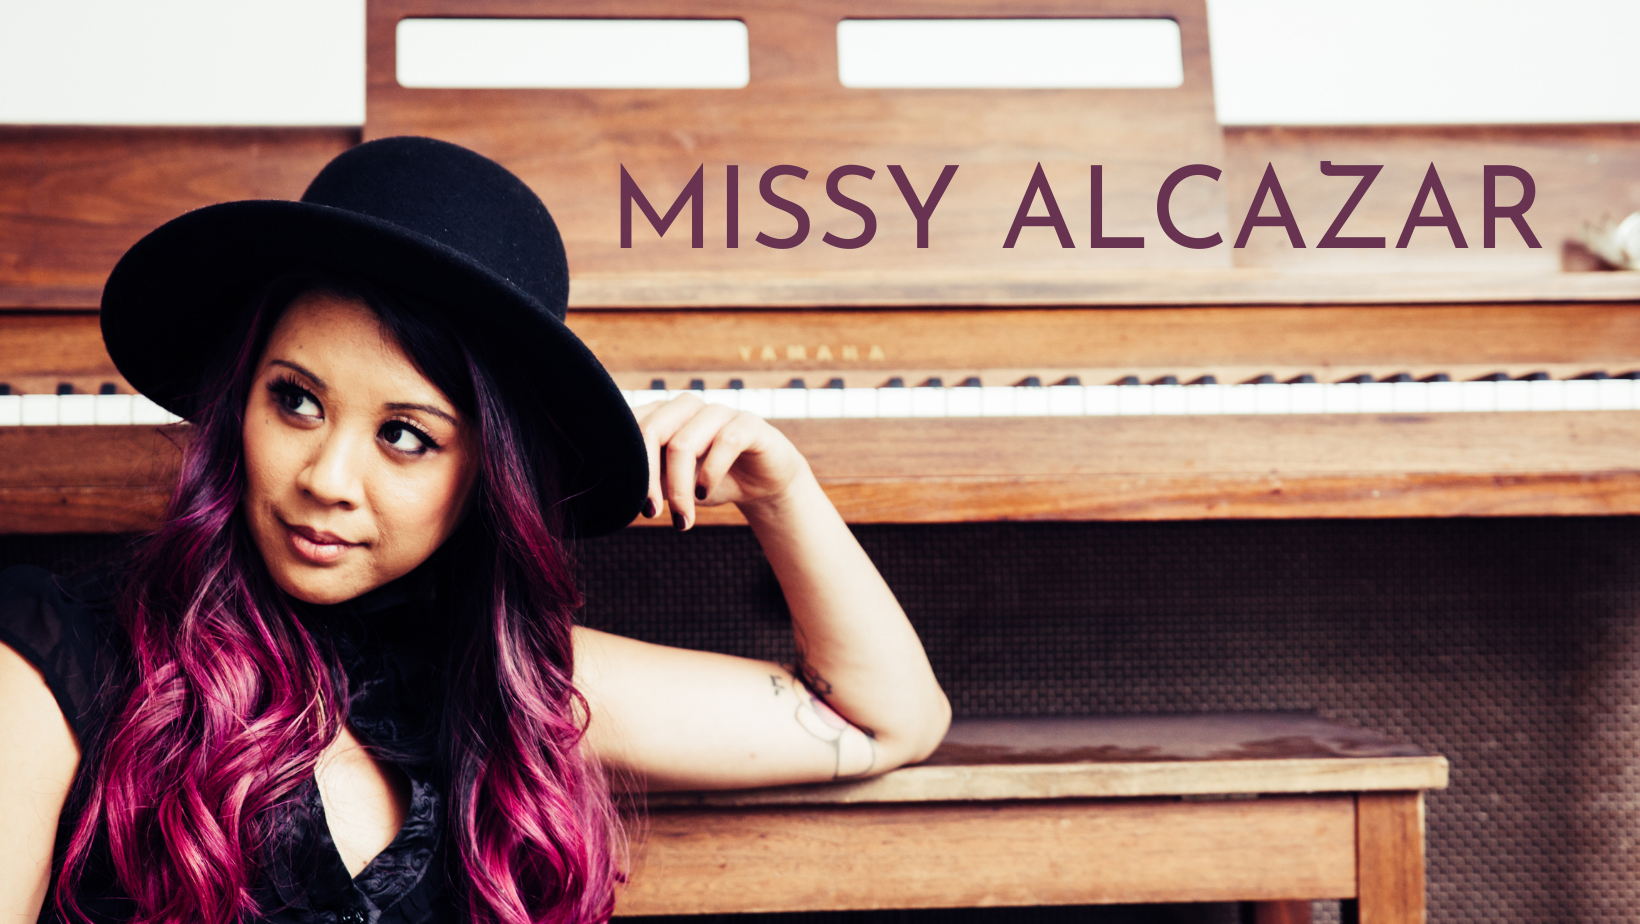 ‘Missy Alcazar’ is a filipina American multi-instrumentalist and true renaissance woman who releases new single ‘Your Love’.